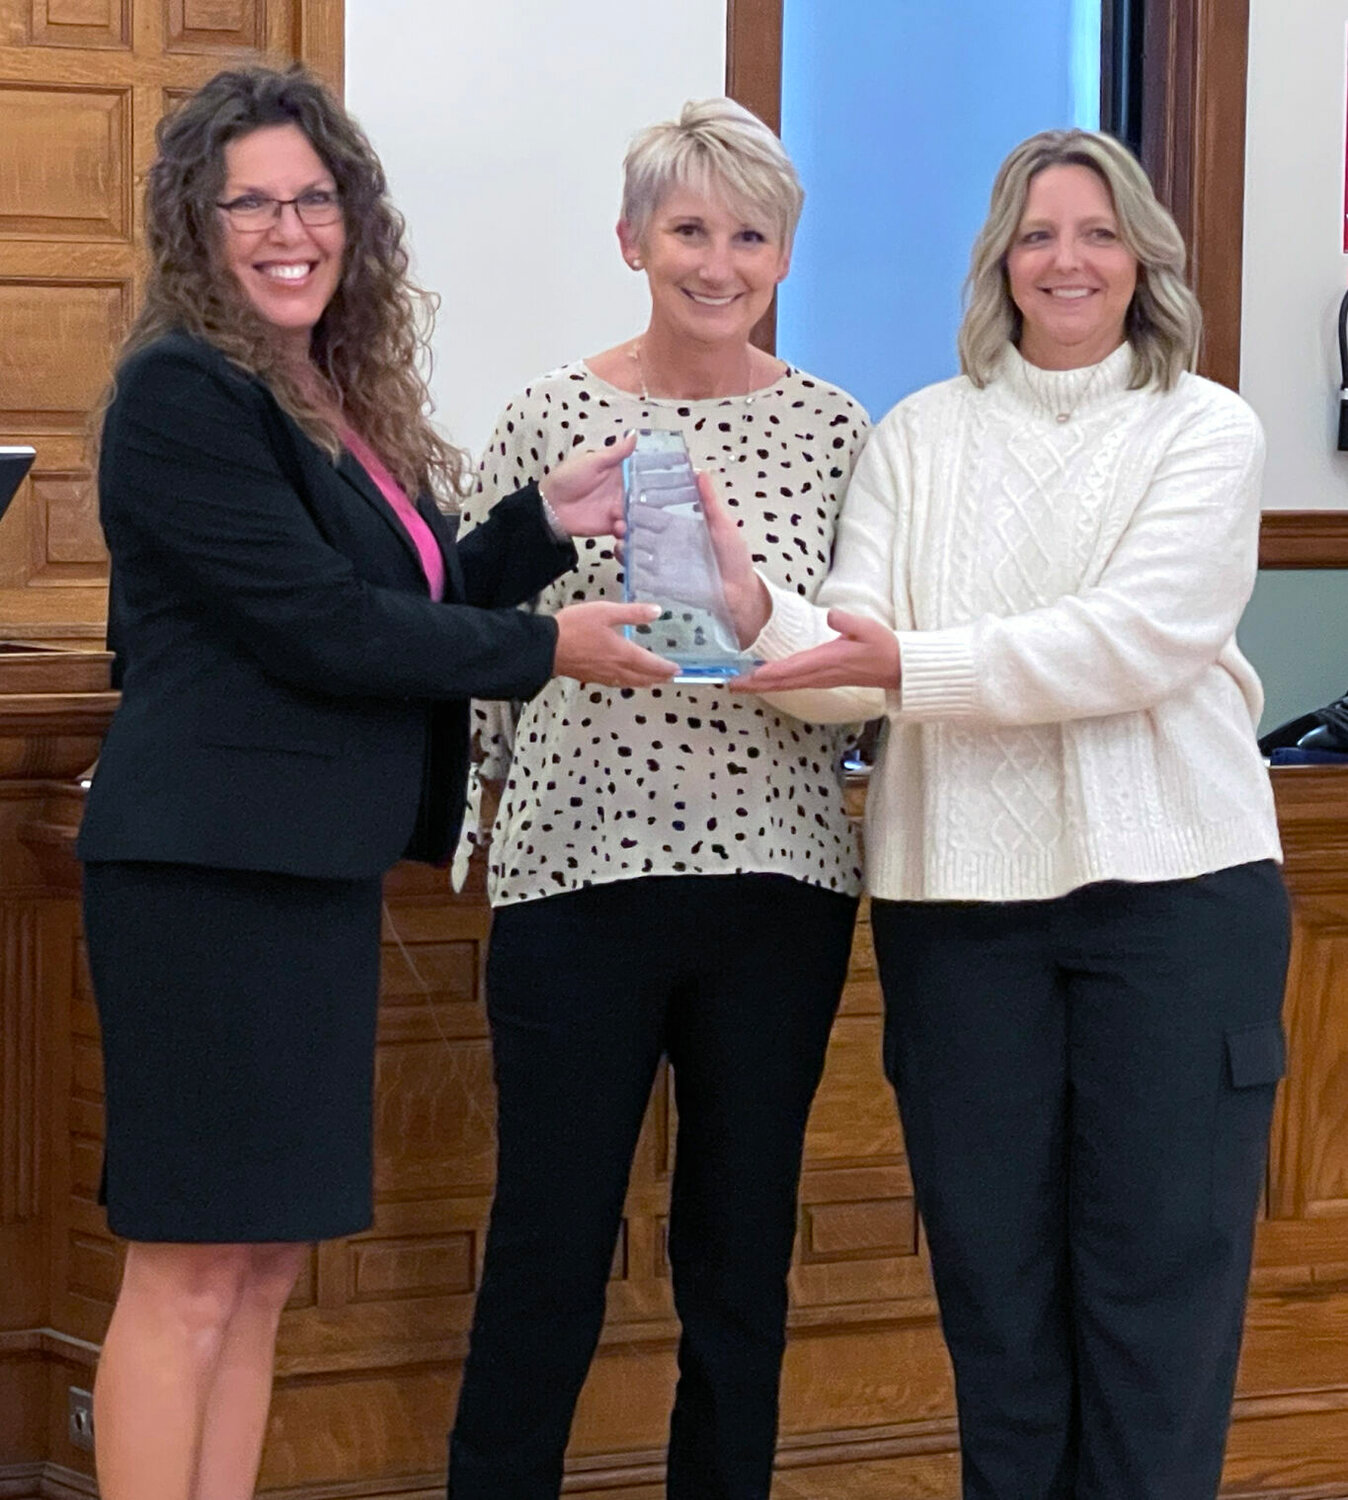 Attorney Sherry Darling (left) receives an award from Andrea Applebury, District Administrator for District 3, and Lacy Craig, District 3, Unit Supervisor.